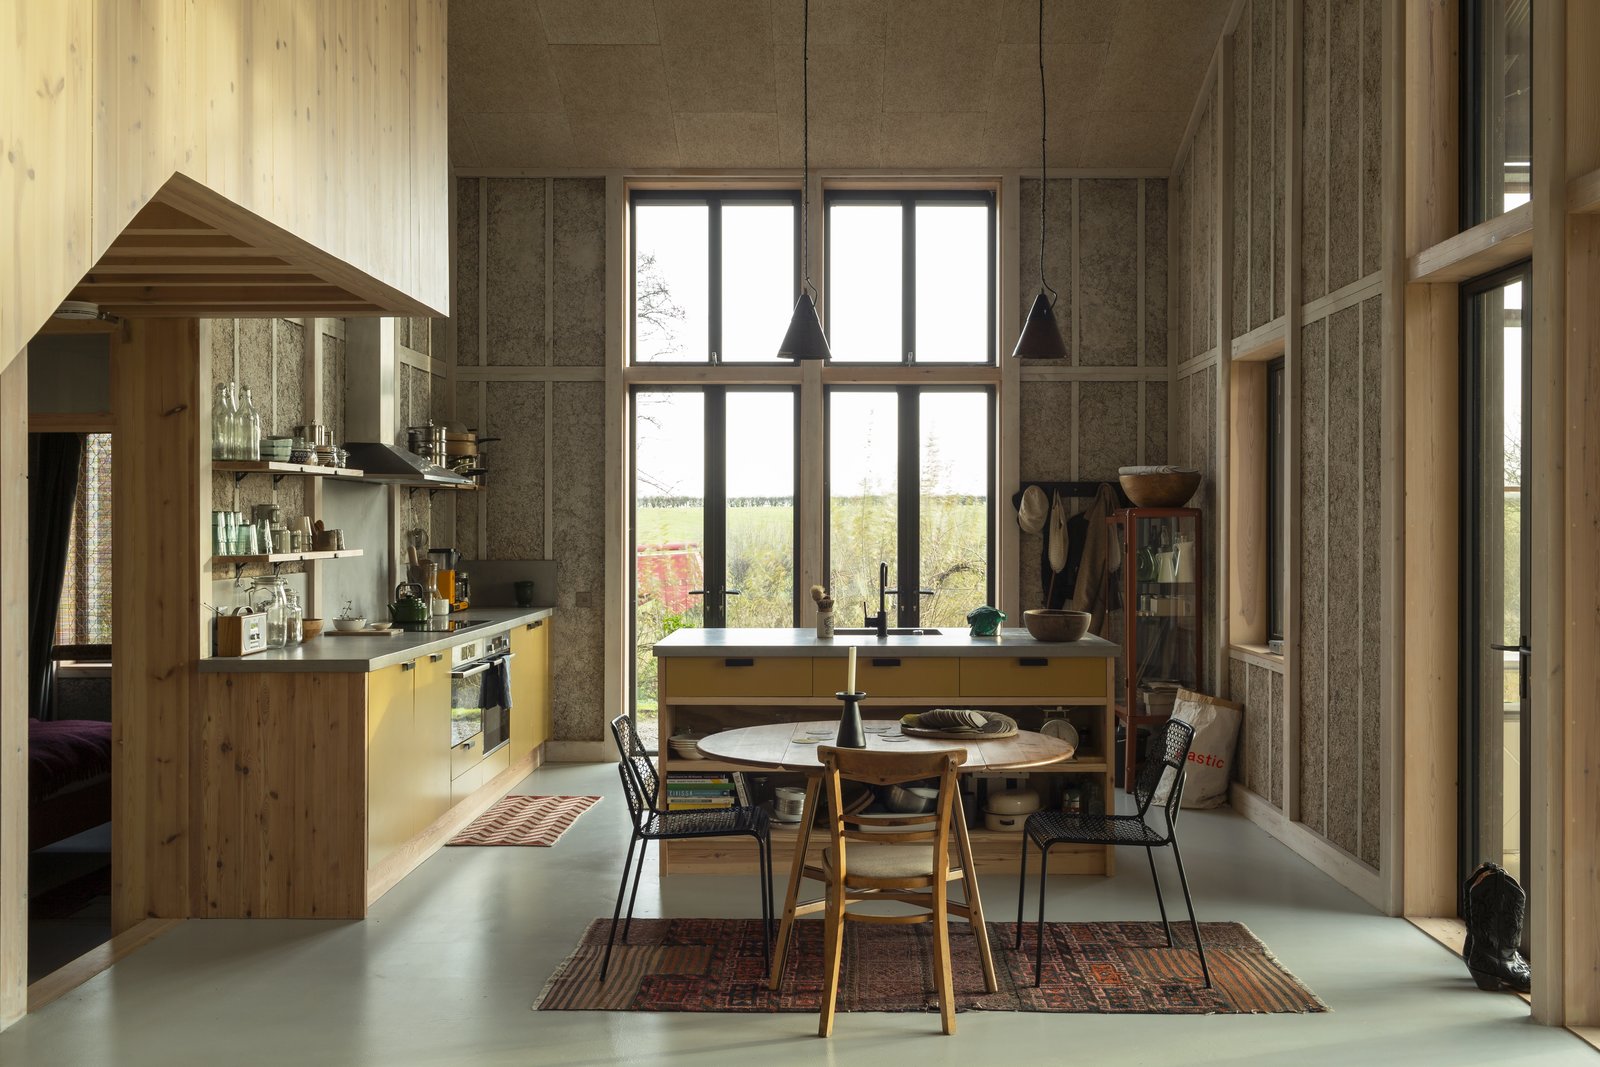 This UK Farmhouse Is Made of Hemp Grown in the Surrounding Fields